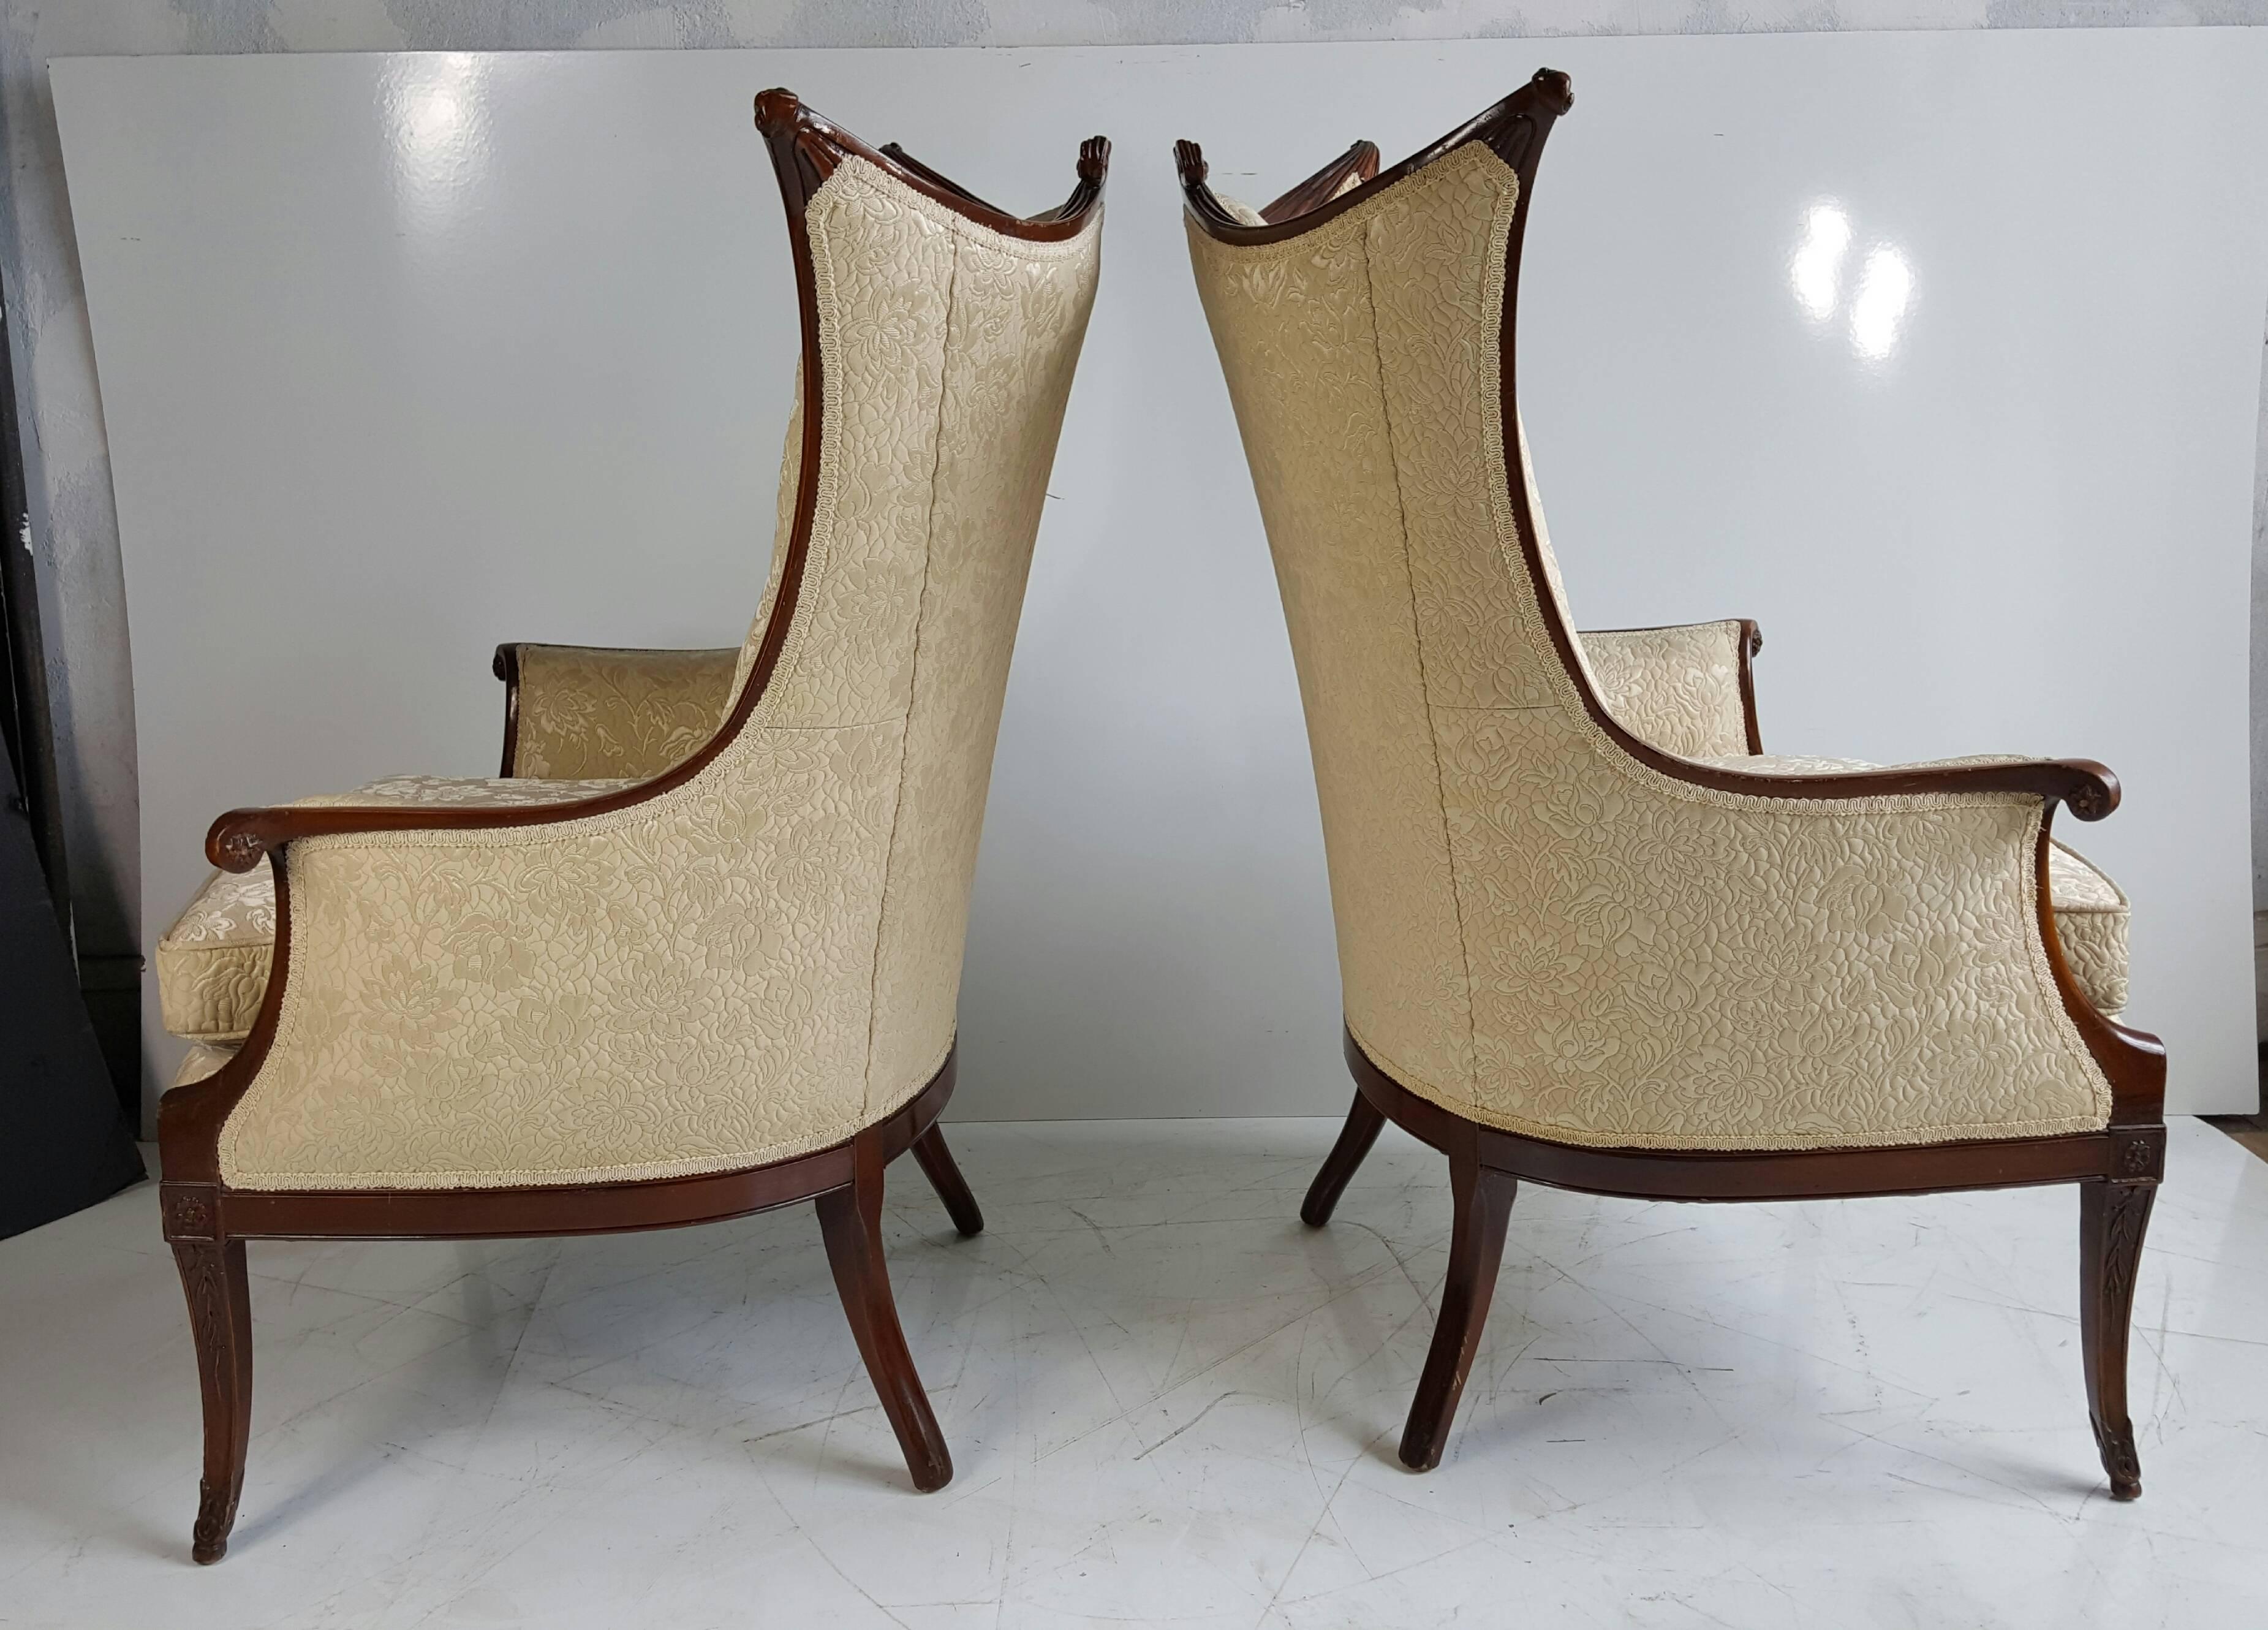 Pair of elegant Hollywood Regency bergères attributed to Grosfeld House. The mahogany frames are intricately carved with drapery and reeding and the elevated tablet is shaped and carved to echo the Directoire period. Wonderful design, superior